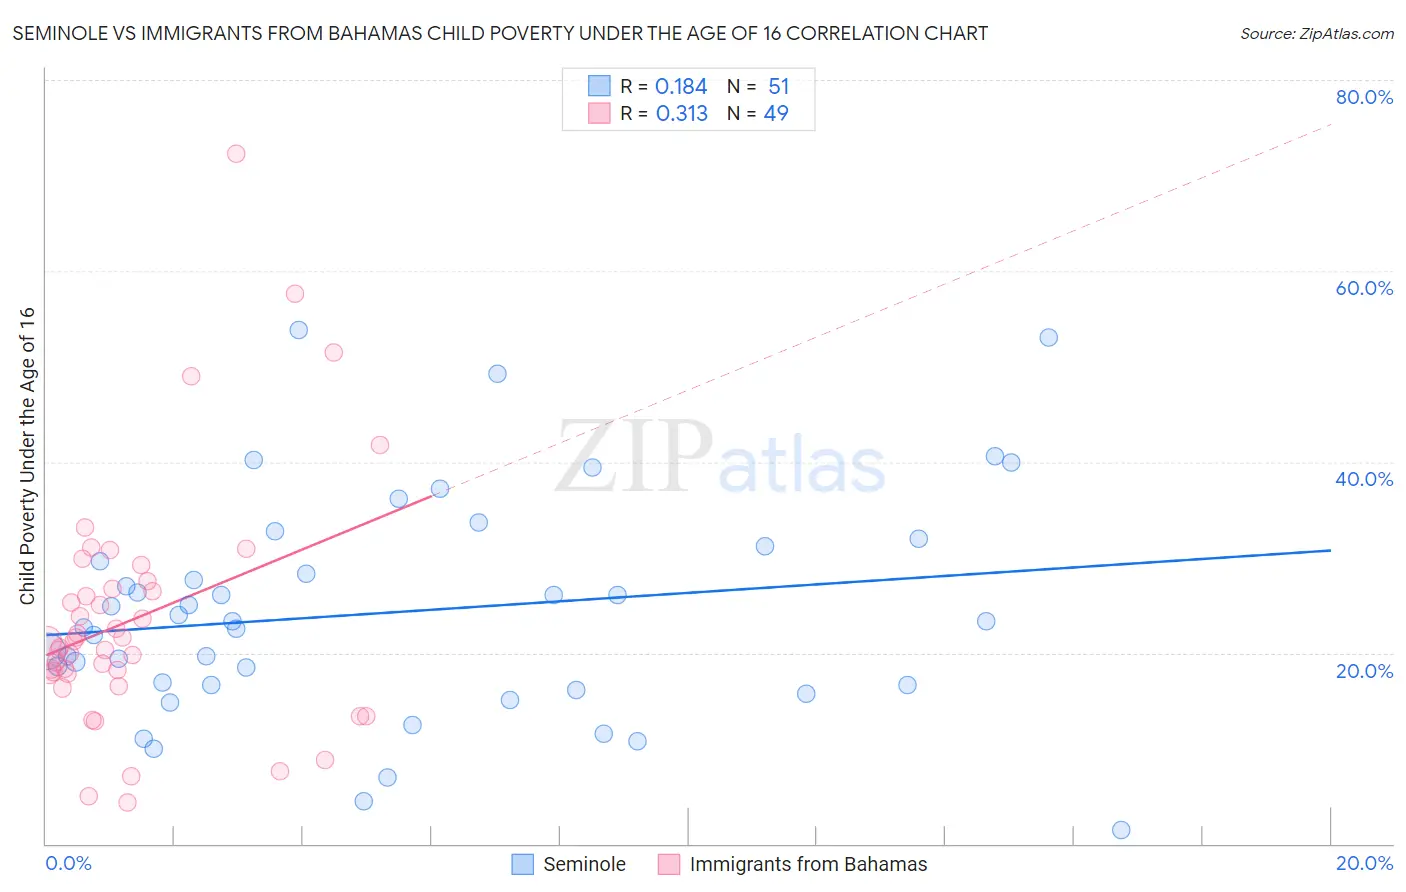 Seminole vs Immigrants from Bahamas Child Poverty Under the Age of 16